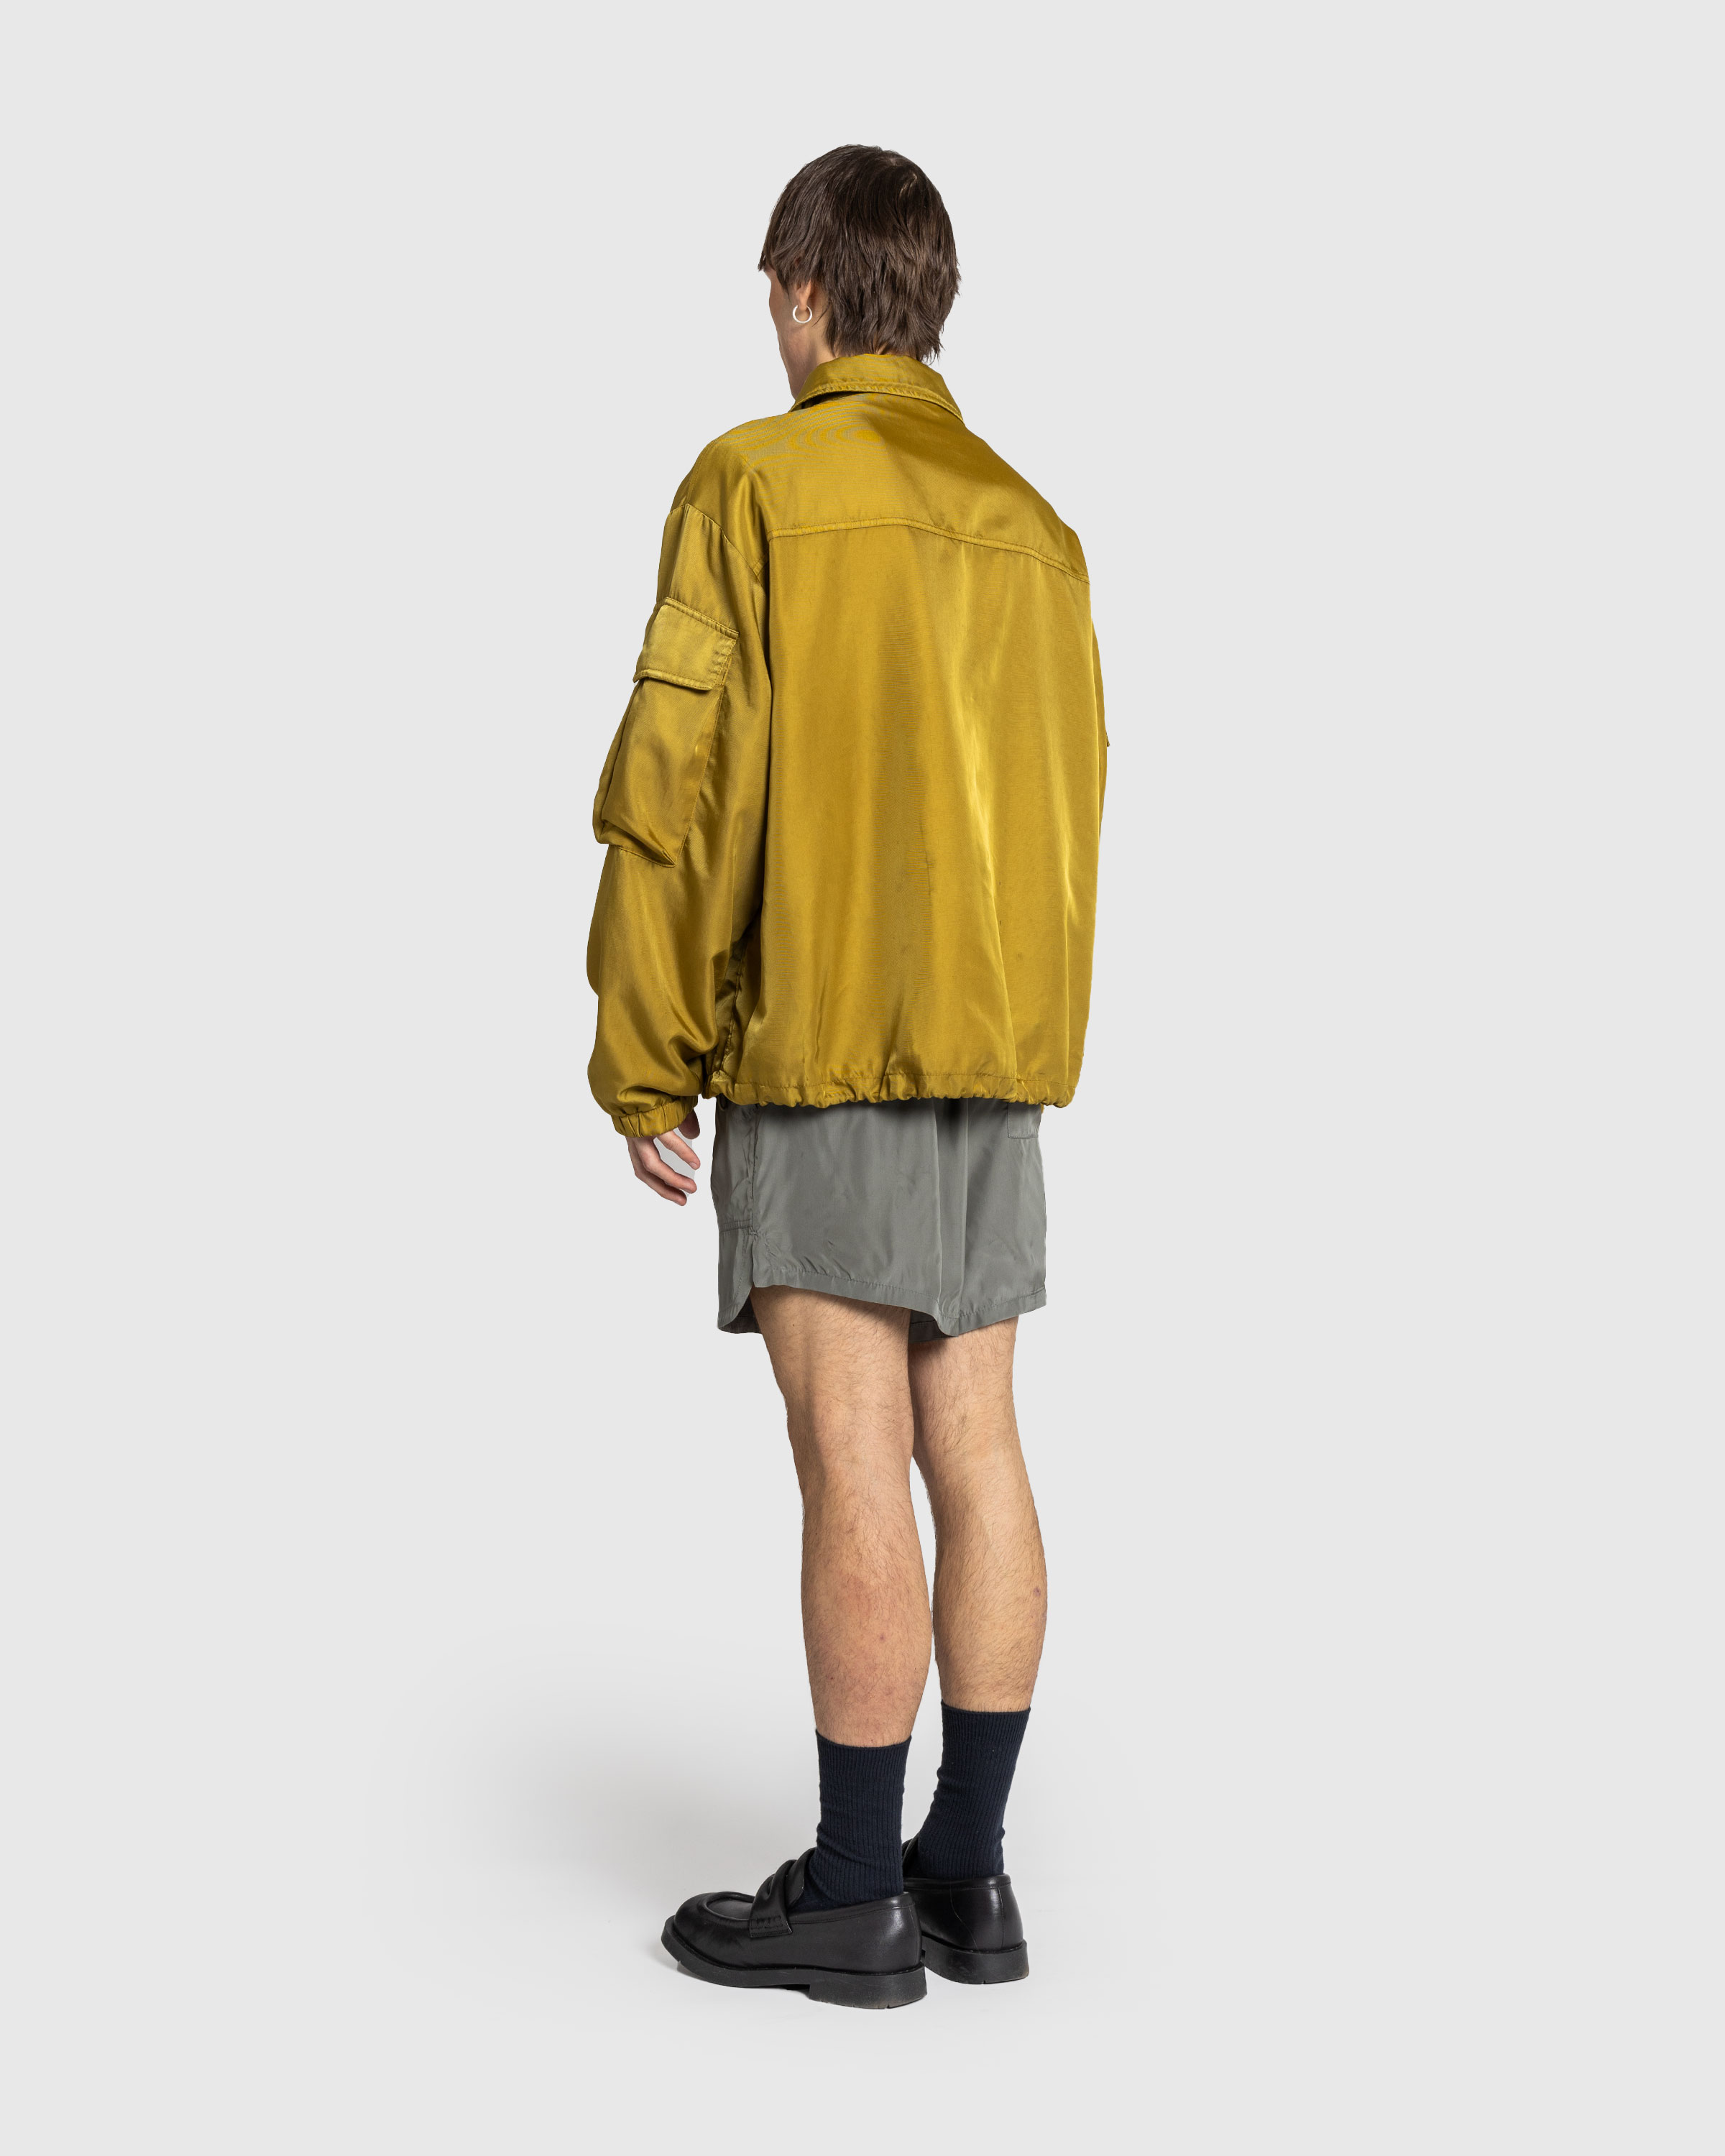 Dries van Noten – Overdyed Jacket Olive - Outerwear - Green - Image 4